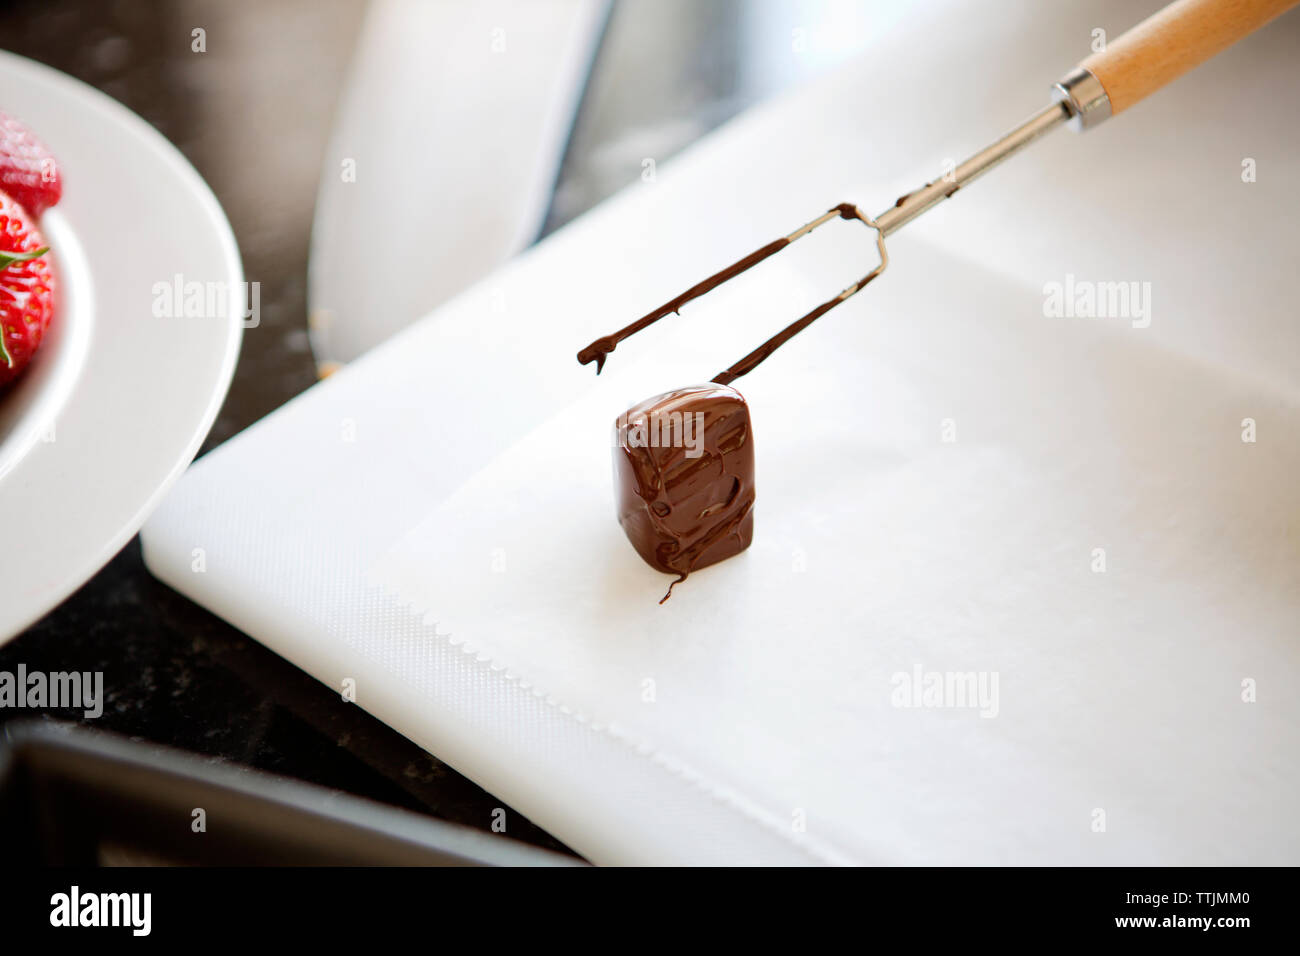 High angle view of food dipped in chocolate kept on tray Stock Photo